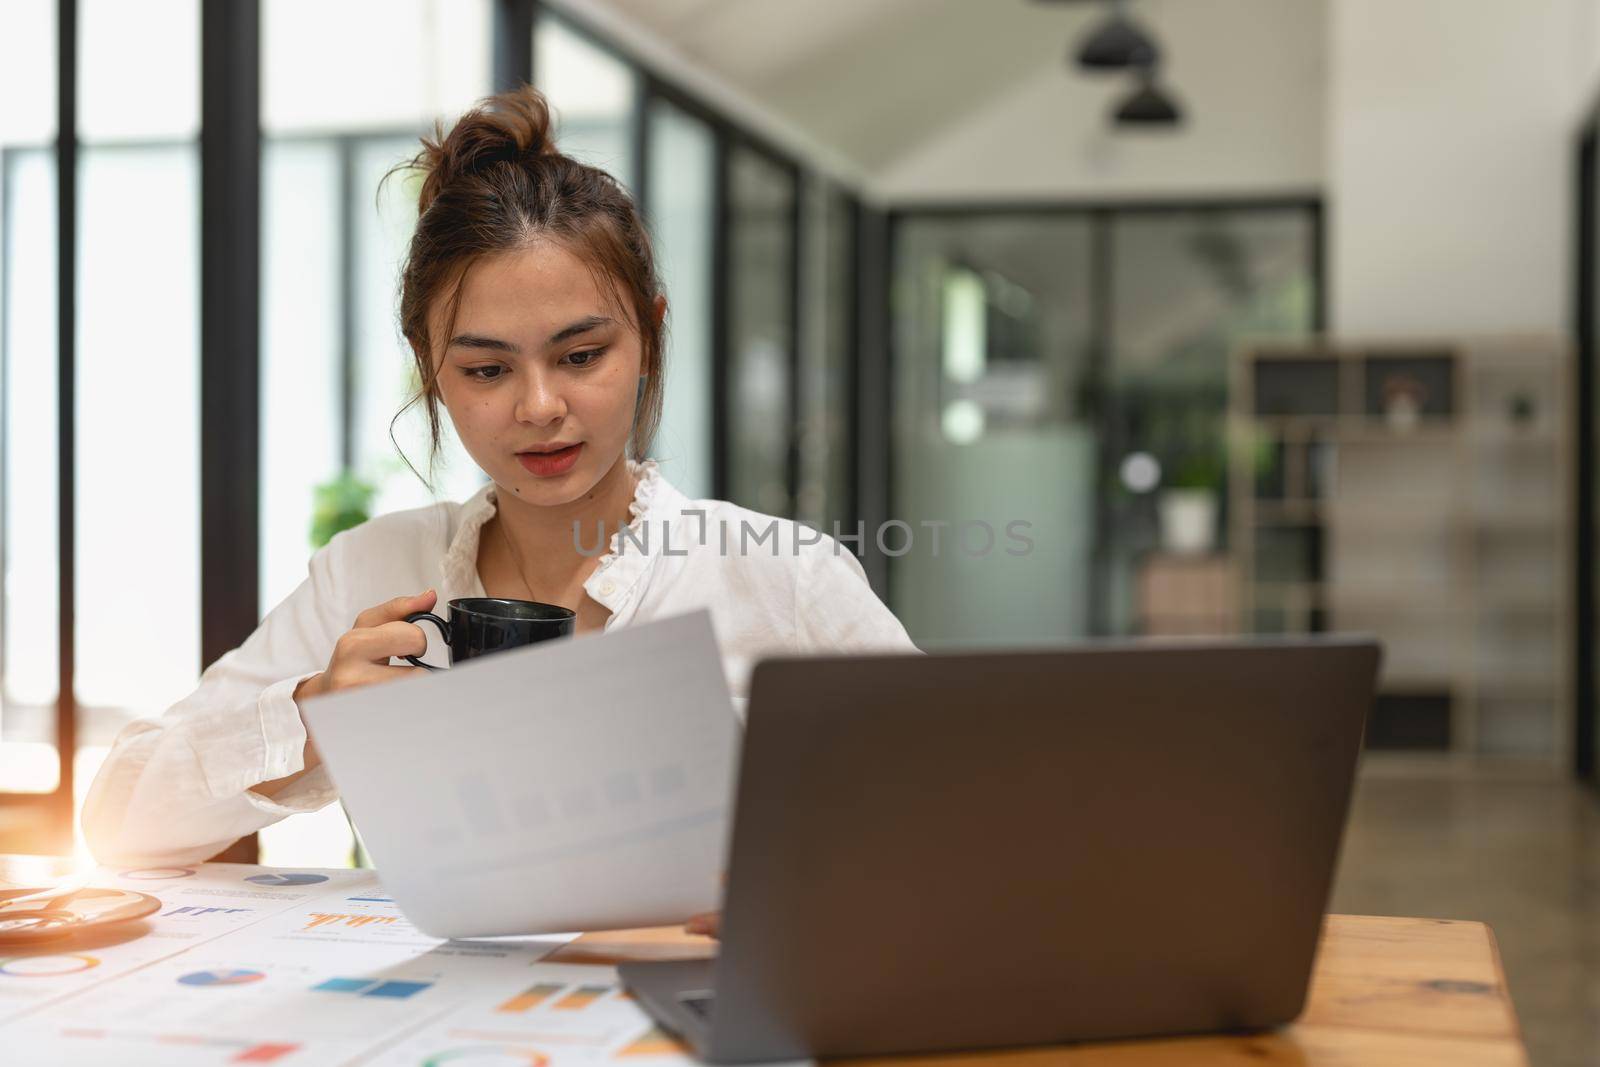 Woman discussing analysis charts or graphs on desk table and using laptop computer. Close up female analysis and strategy concept